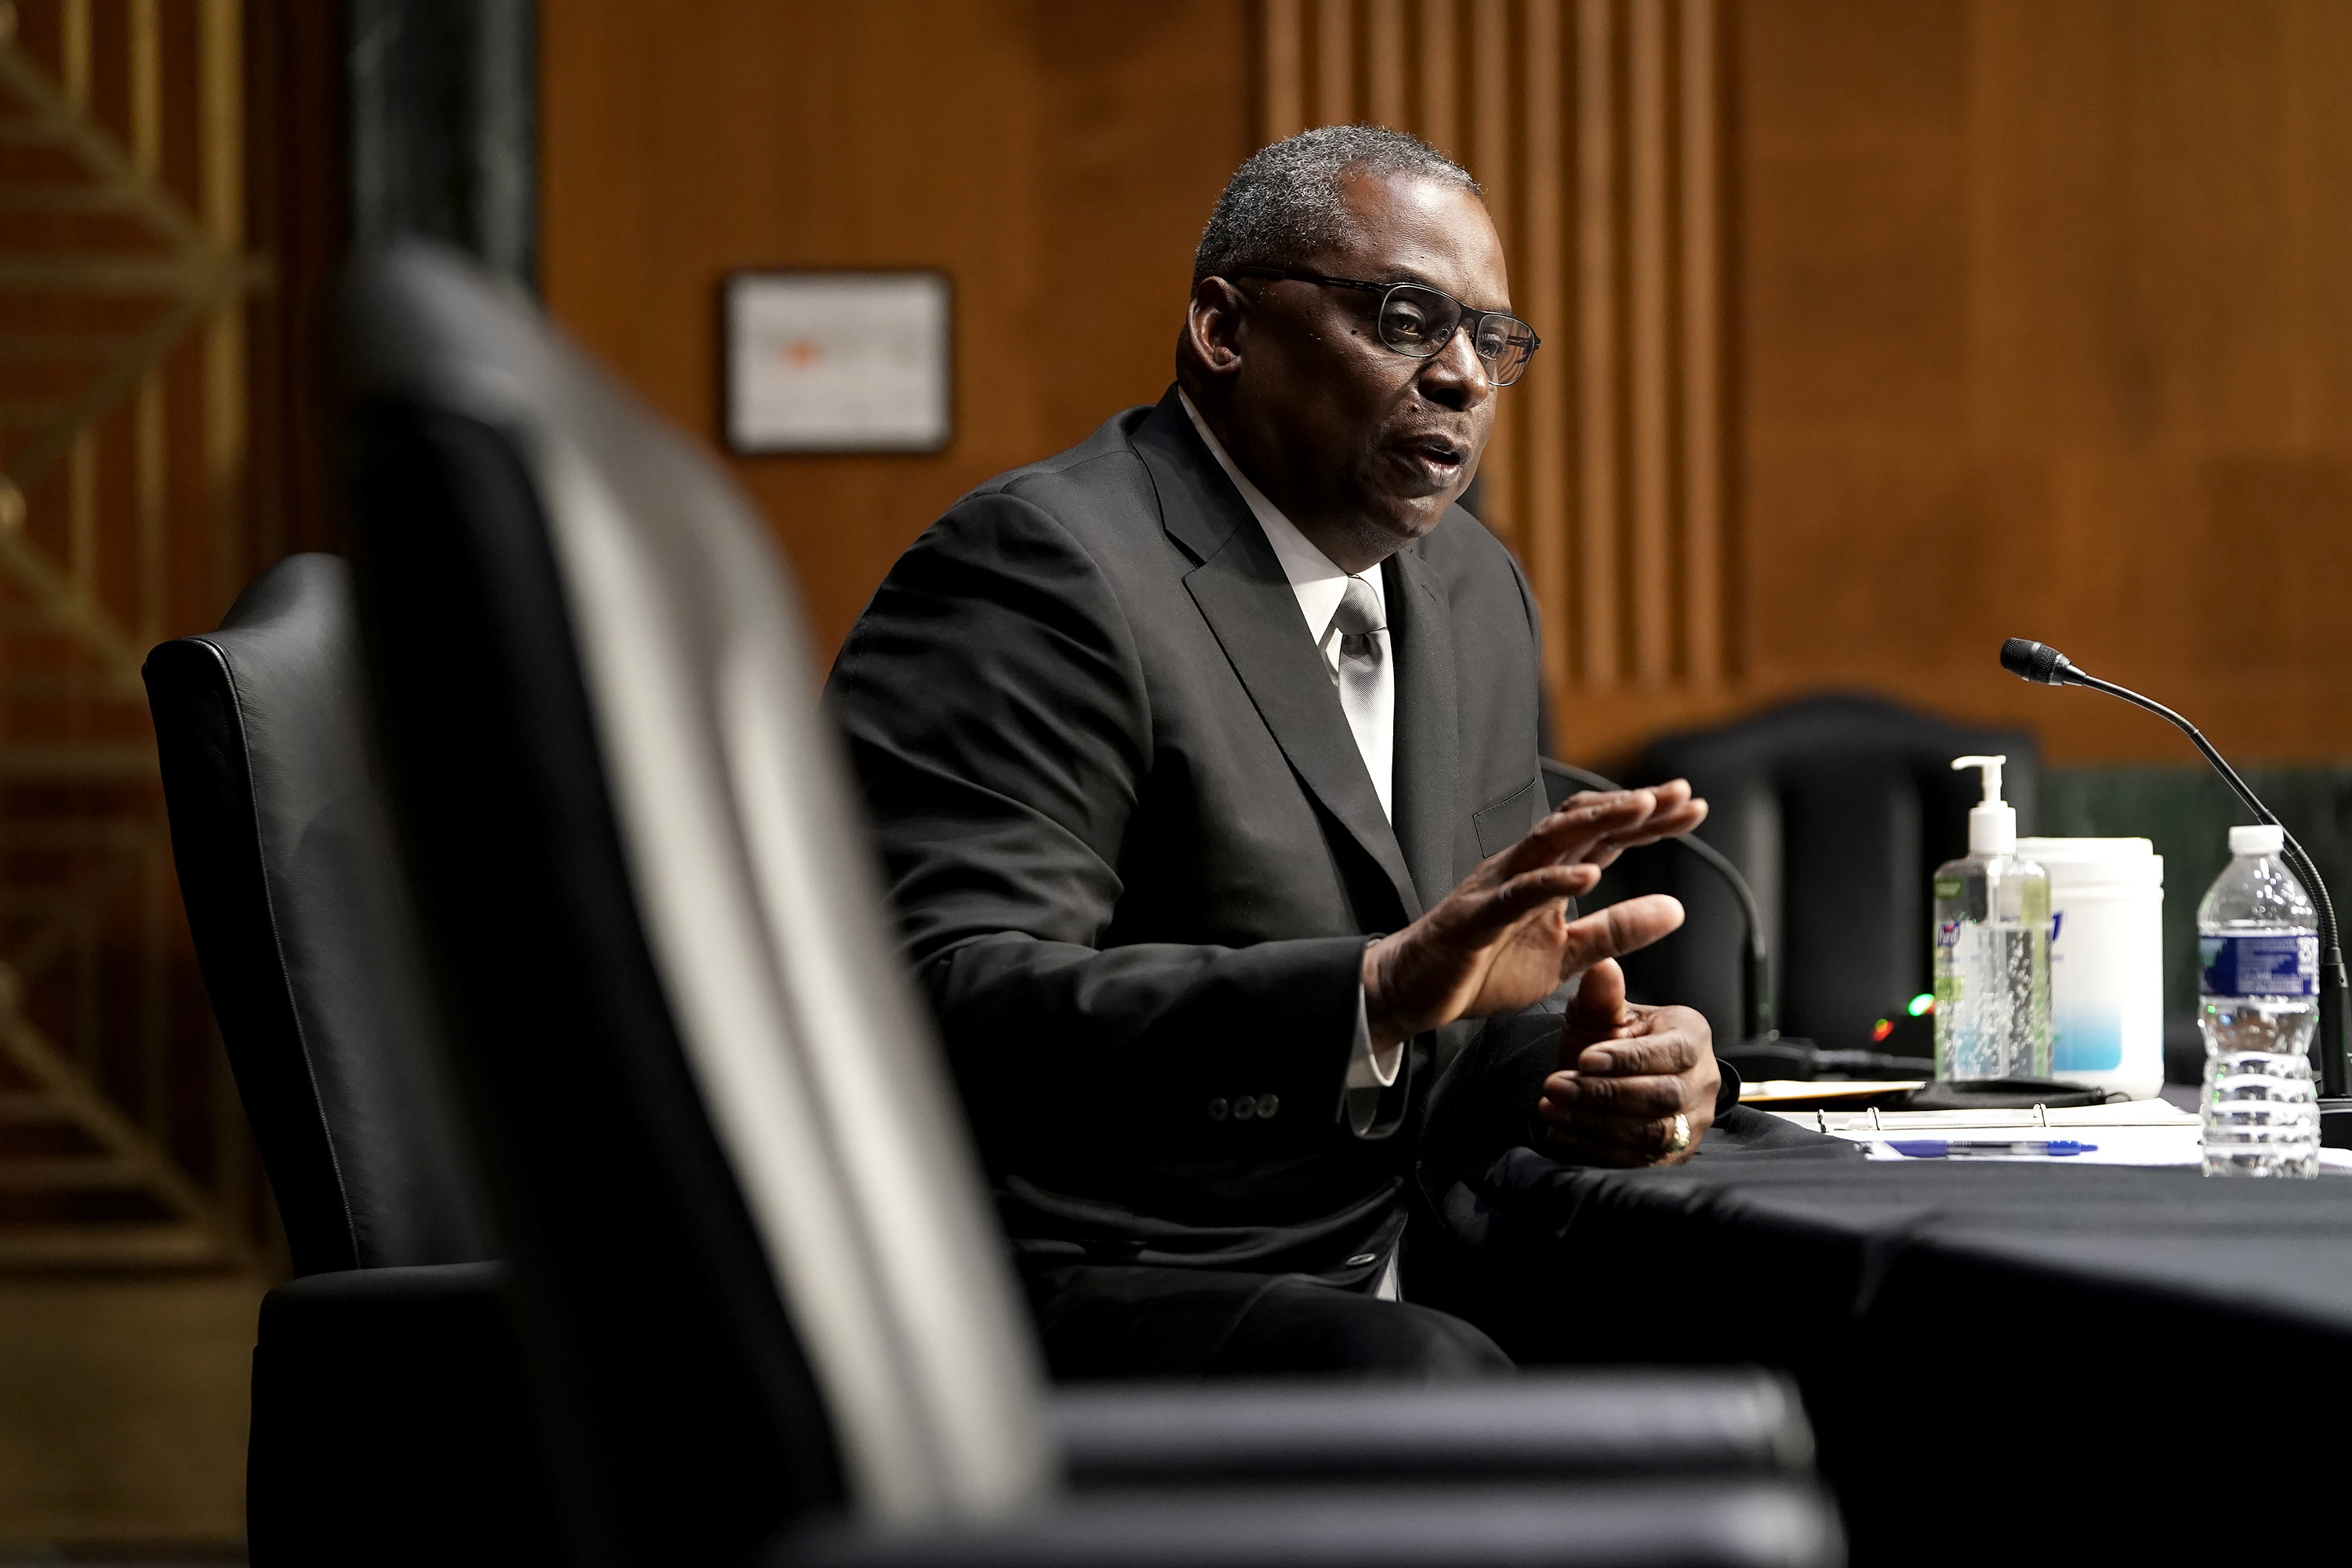 Retired General Lloyd Austin testifies before the Senate Armed Services Committee during his conformation hearing to be the next Secretary of Defense in the Dirksen Senate Office Building in Washington, DC, on January 19.